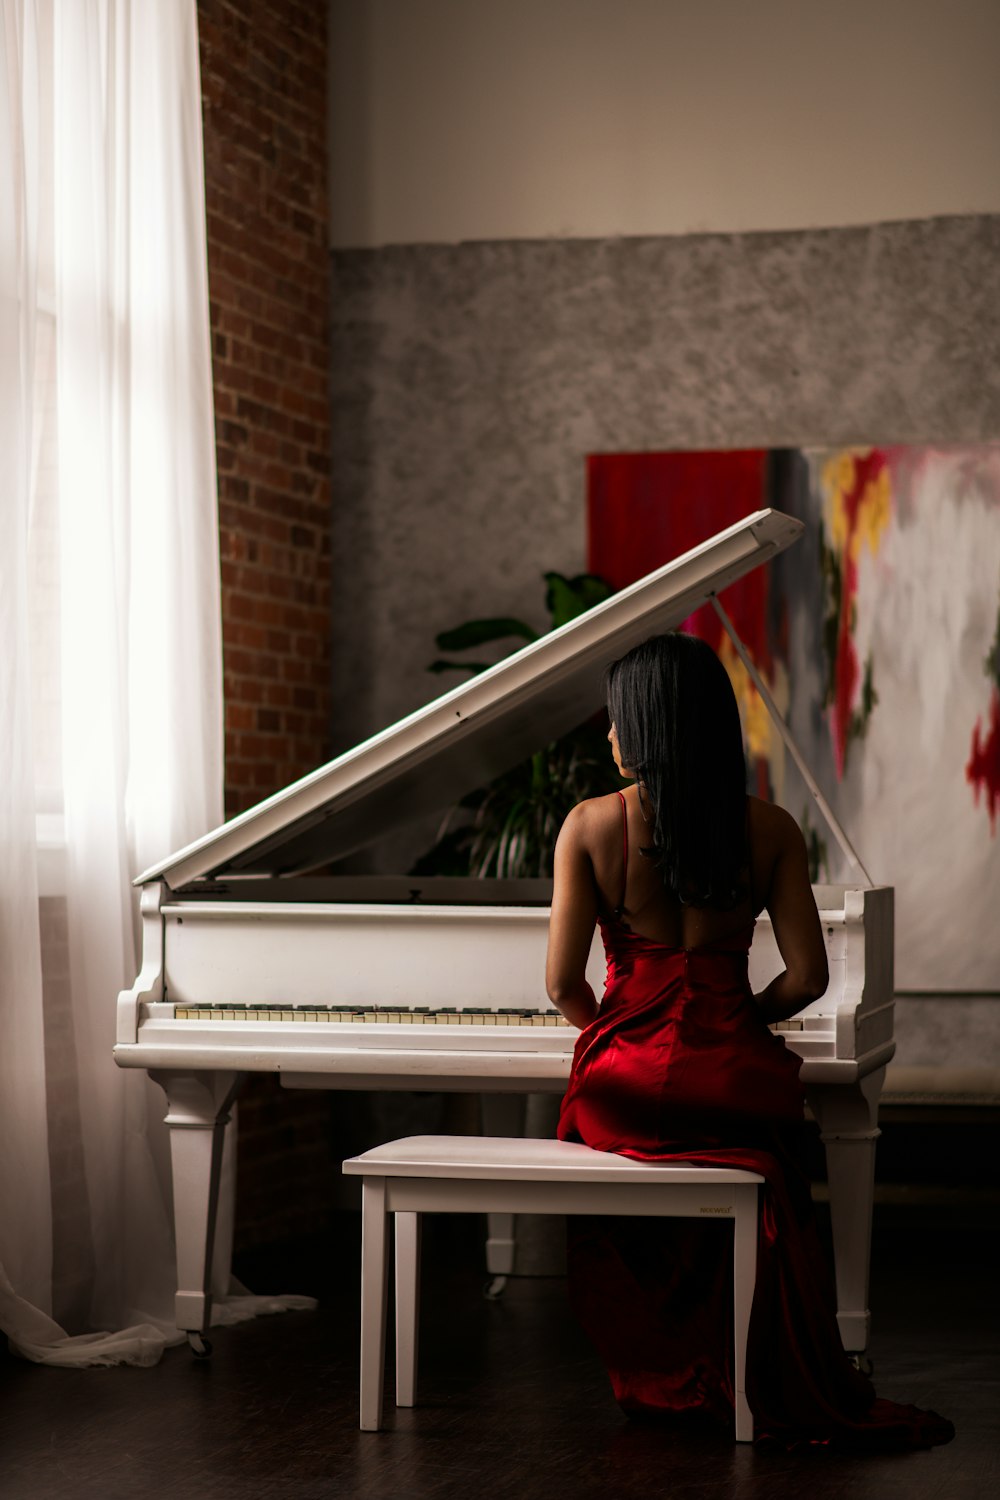 Woman in red dress sitting on piano photo – Free Indoors Image on Unsplash